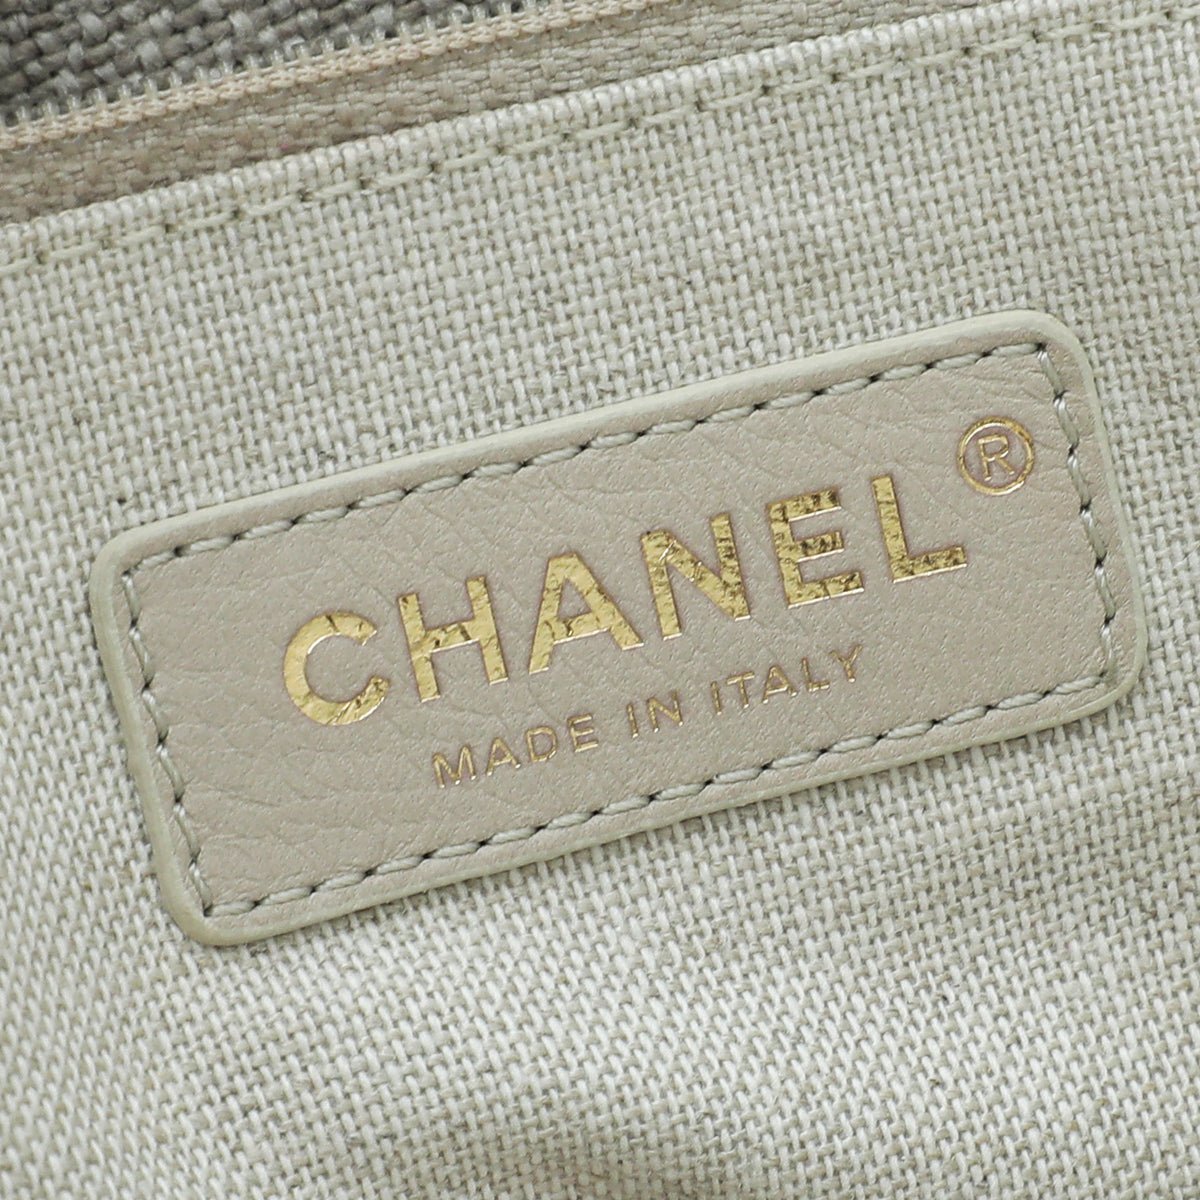 Chanel - Chanel Bicolor Deauville Tote Large Bag | The Closet